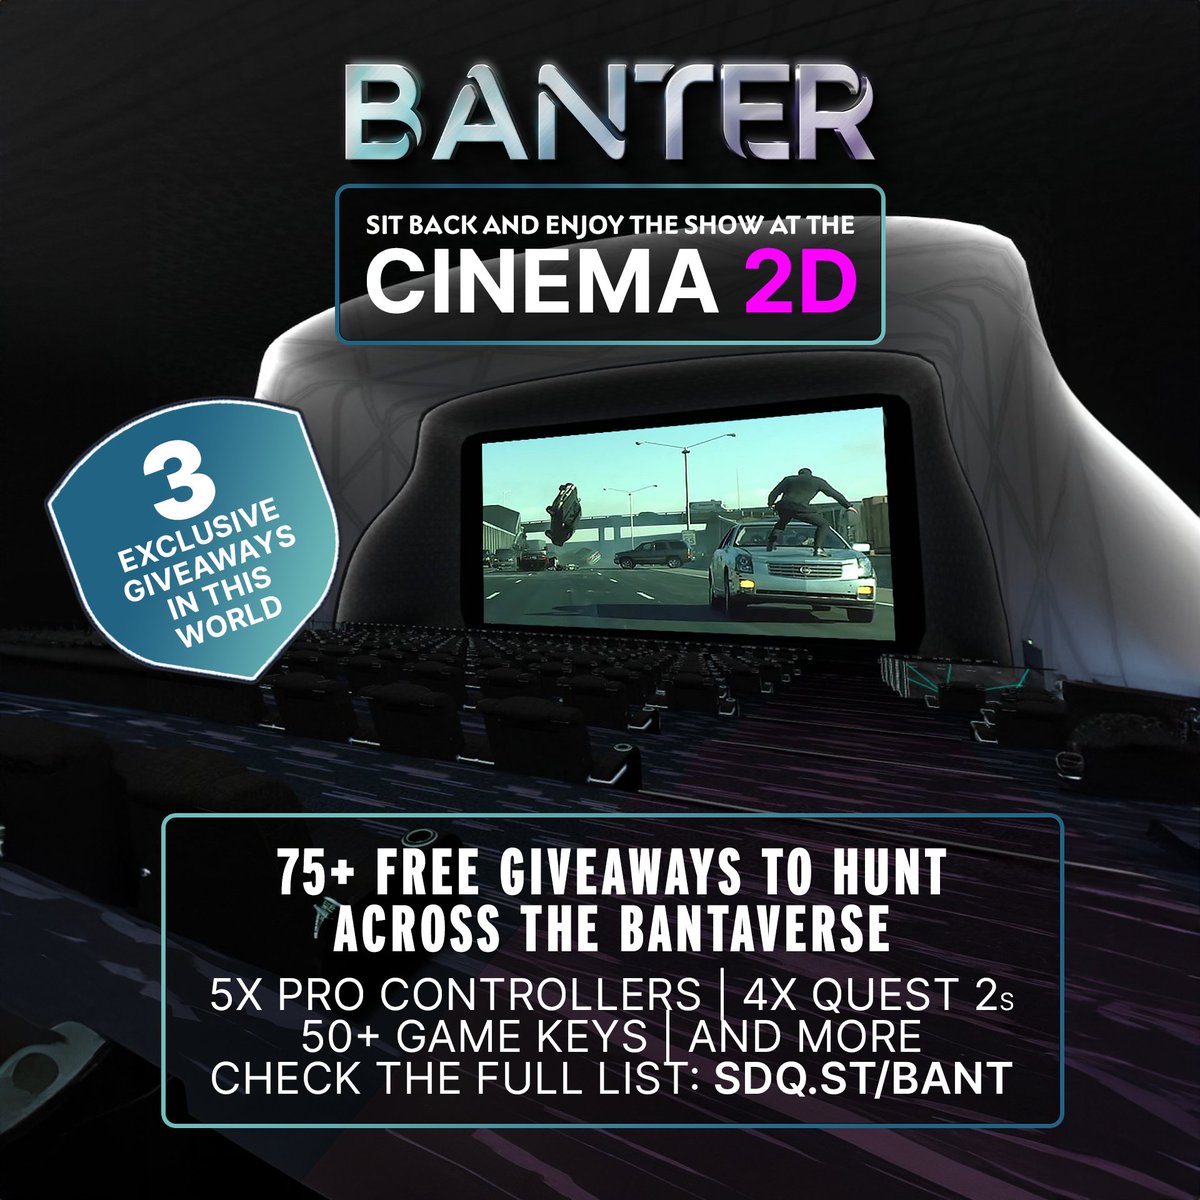 Lights, camera, giveaways!🎬 Visit the Cinema 2D space and try your luck to win incredible prizes. 

There are 3 FREE giveaways exclusively in this virtual cinema and over 75 total scattered across the bantaverse! 🤩 

#BanterVR #FreeGiveaways